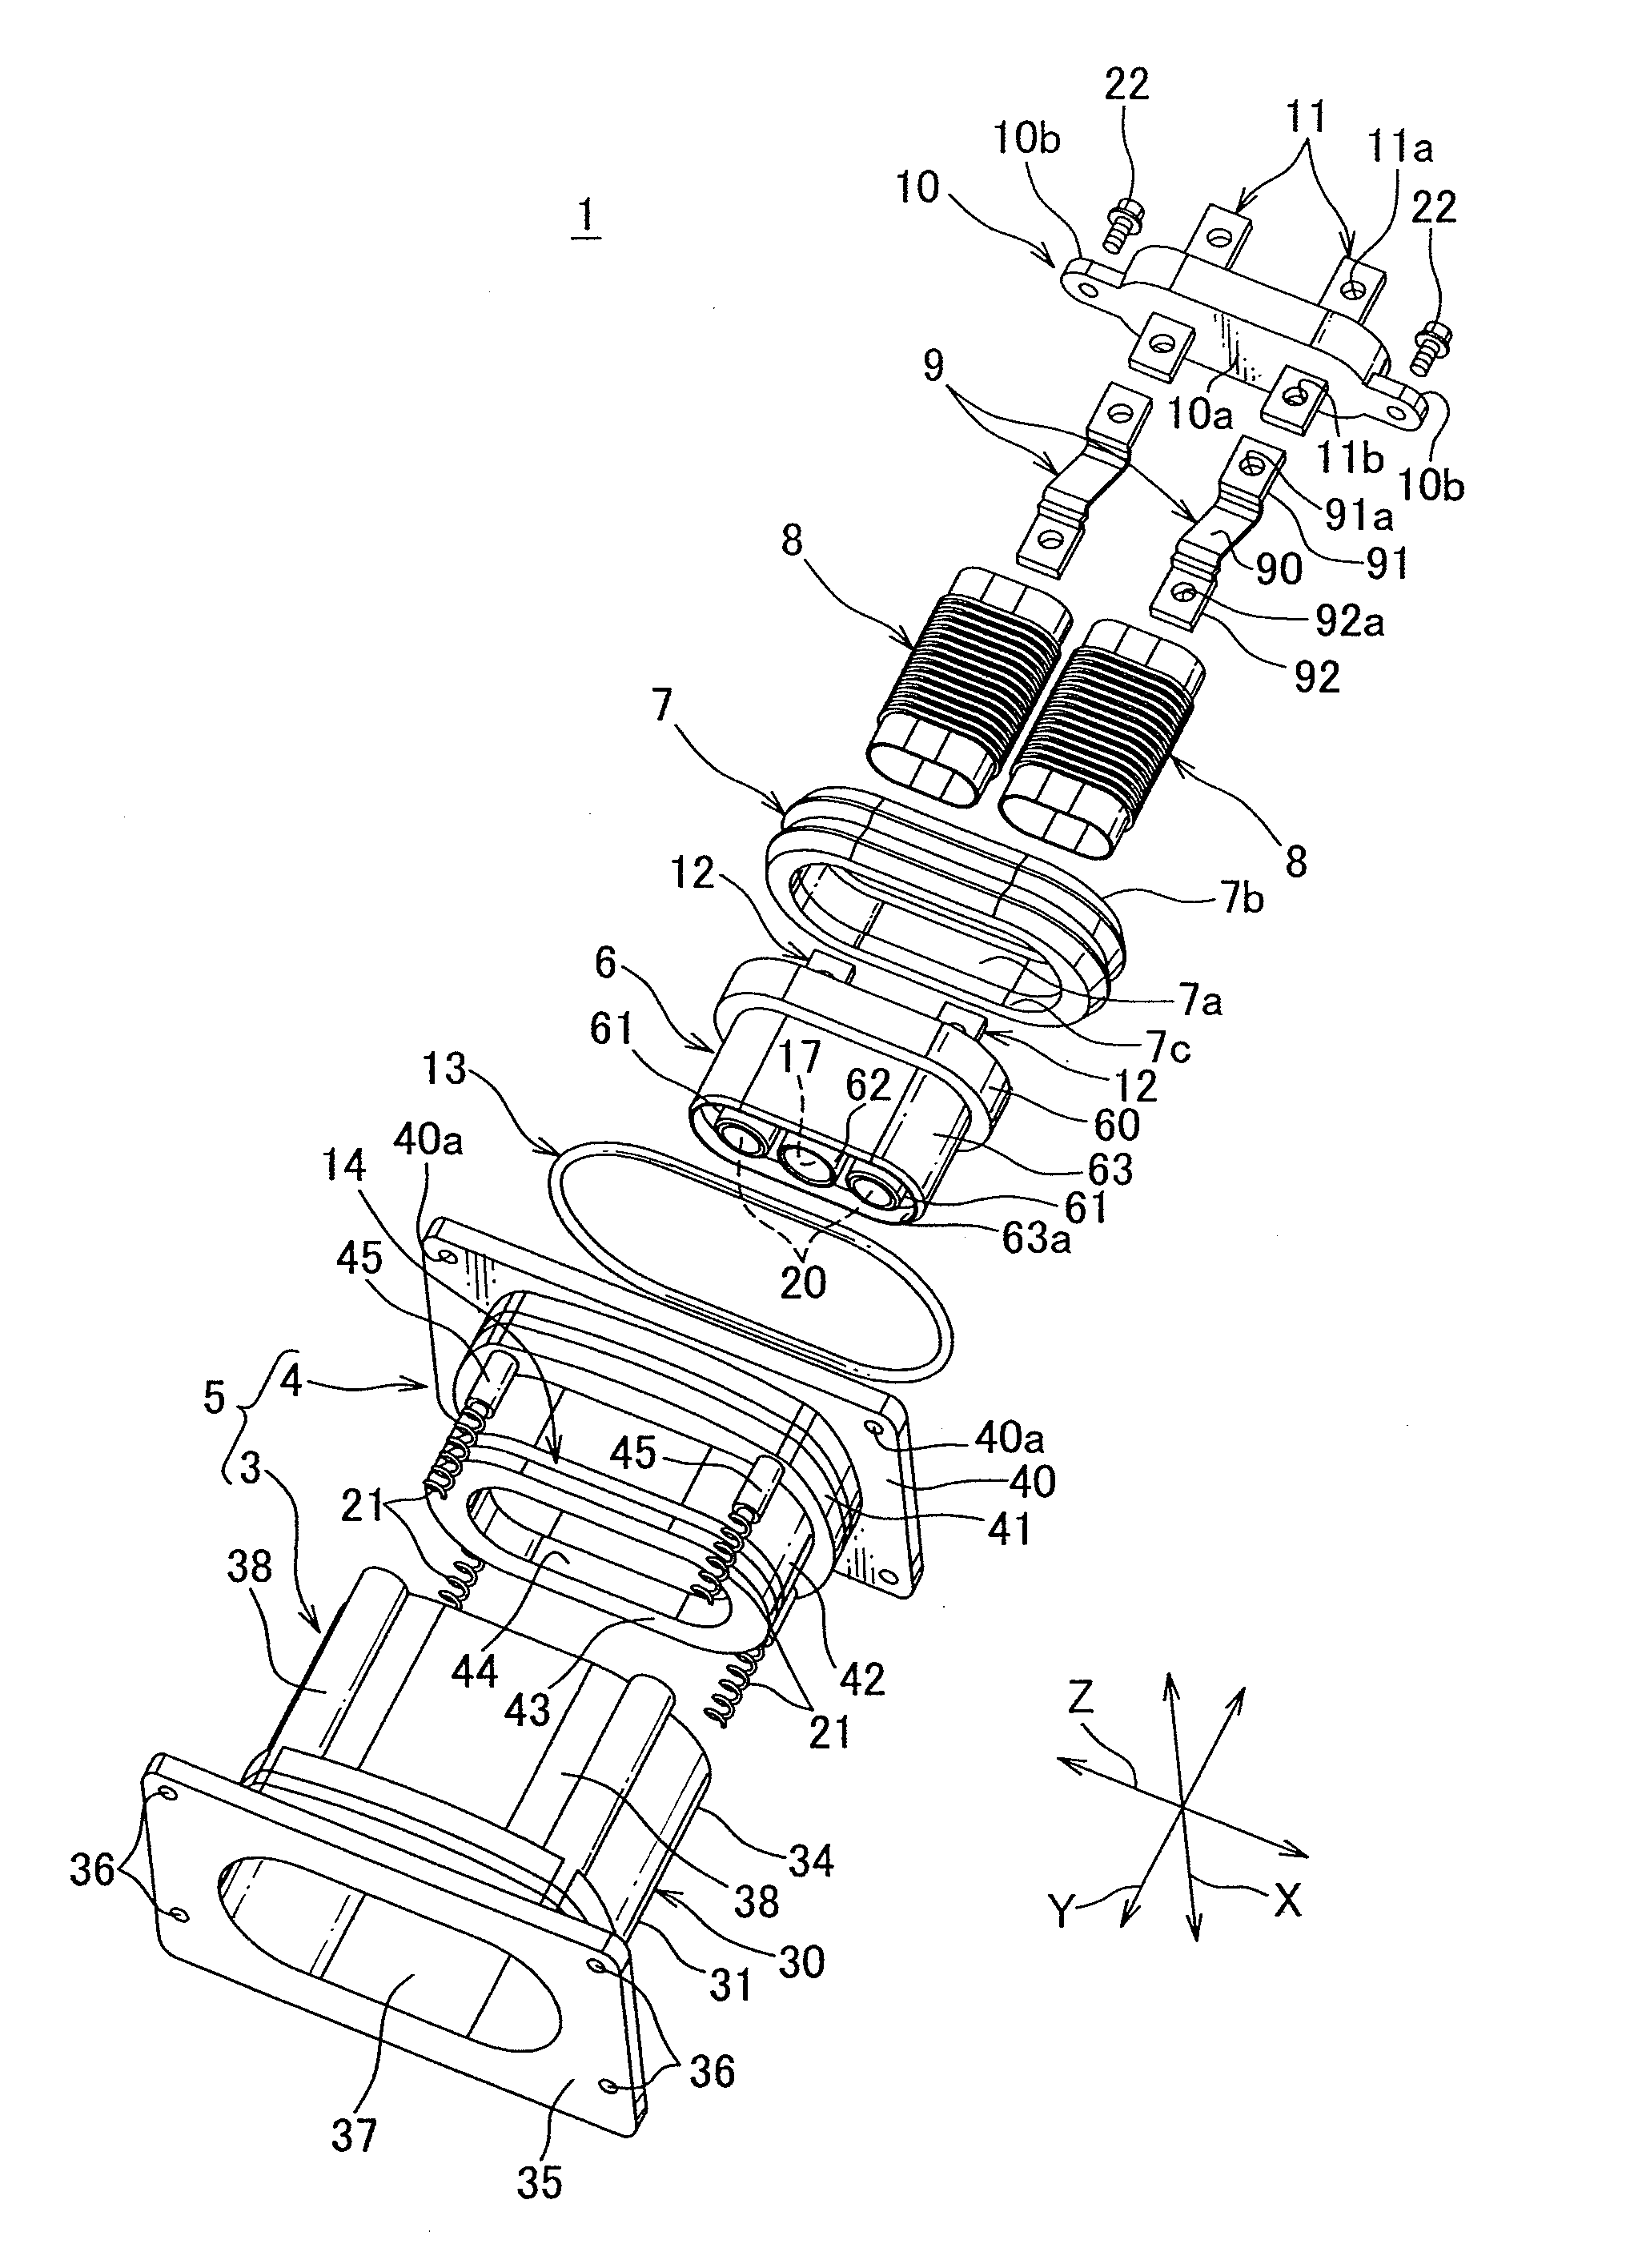 Floating connector with flexible conductive member